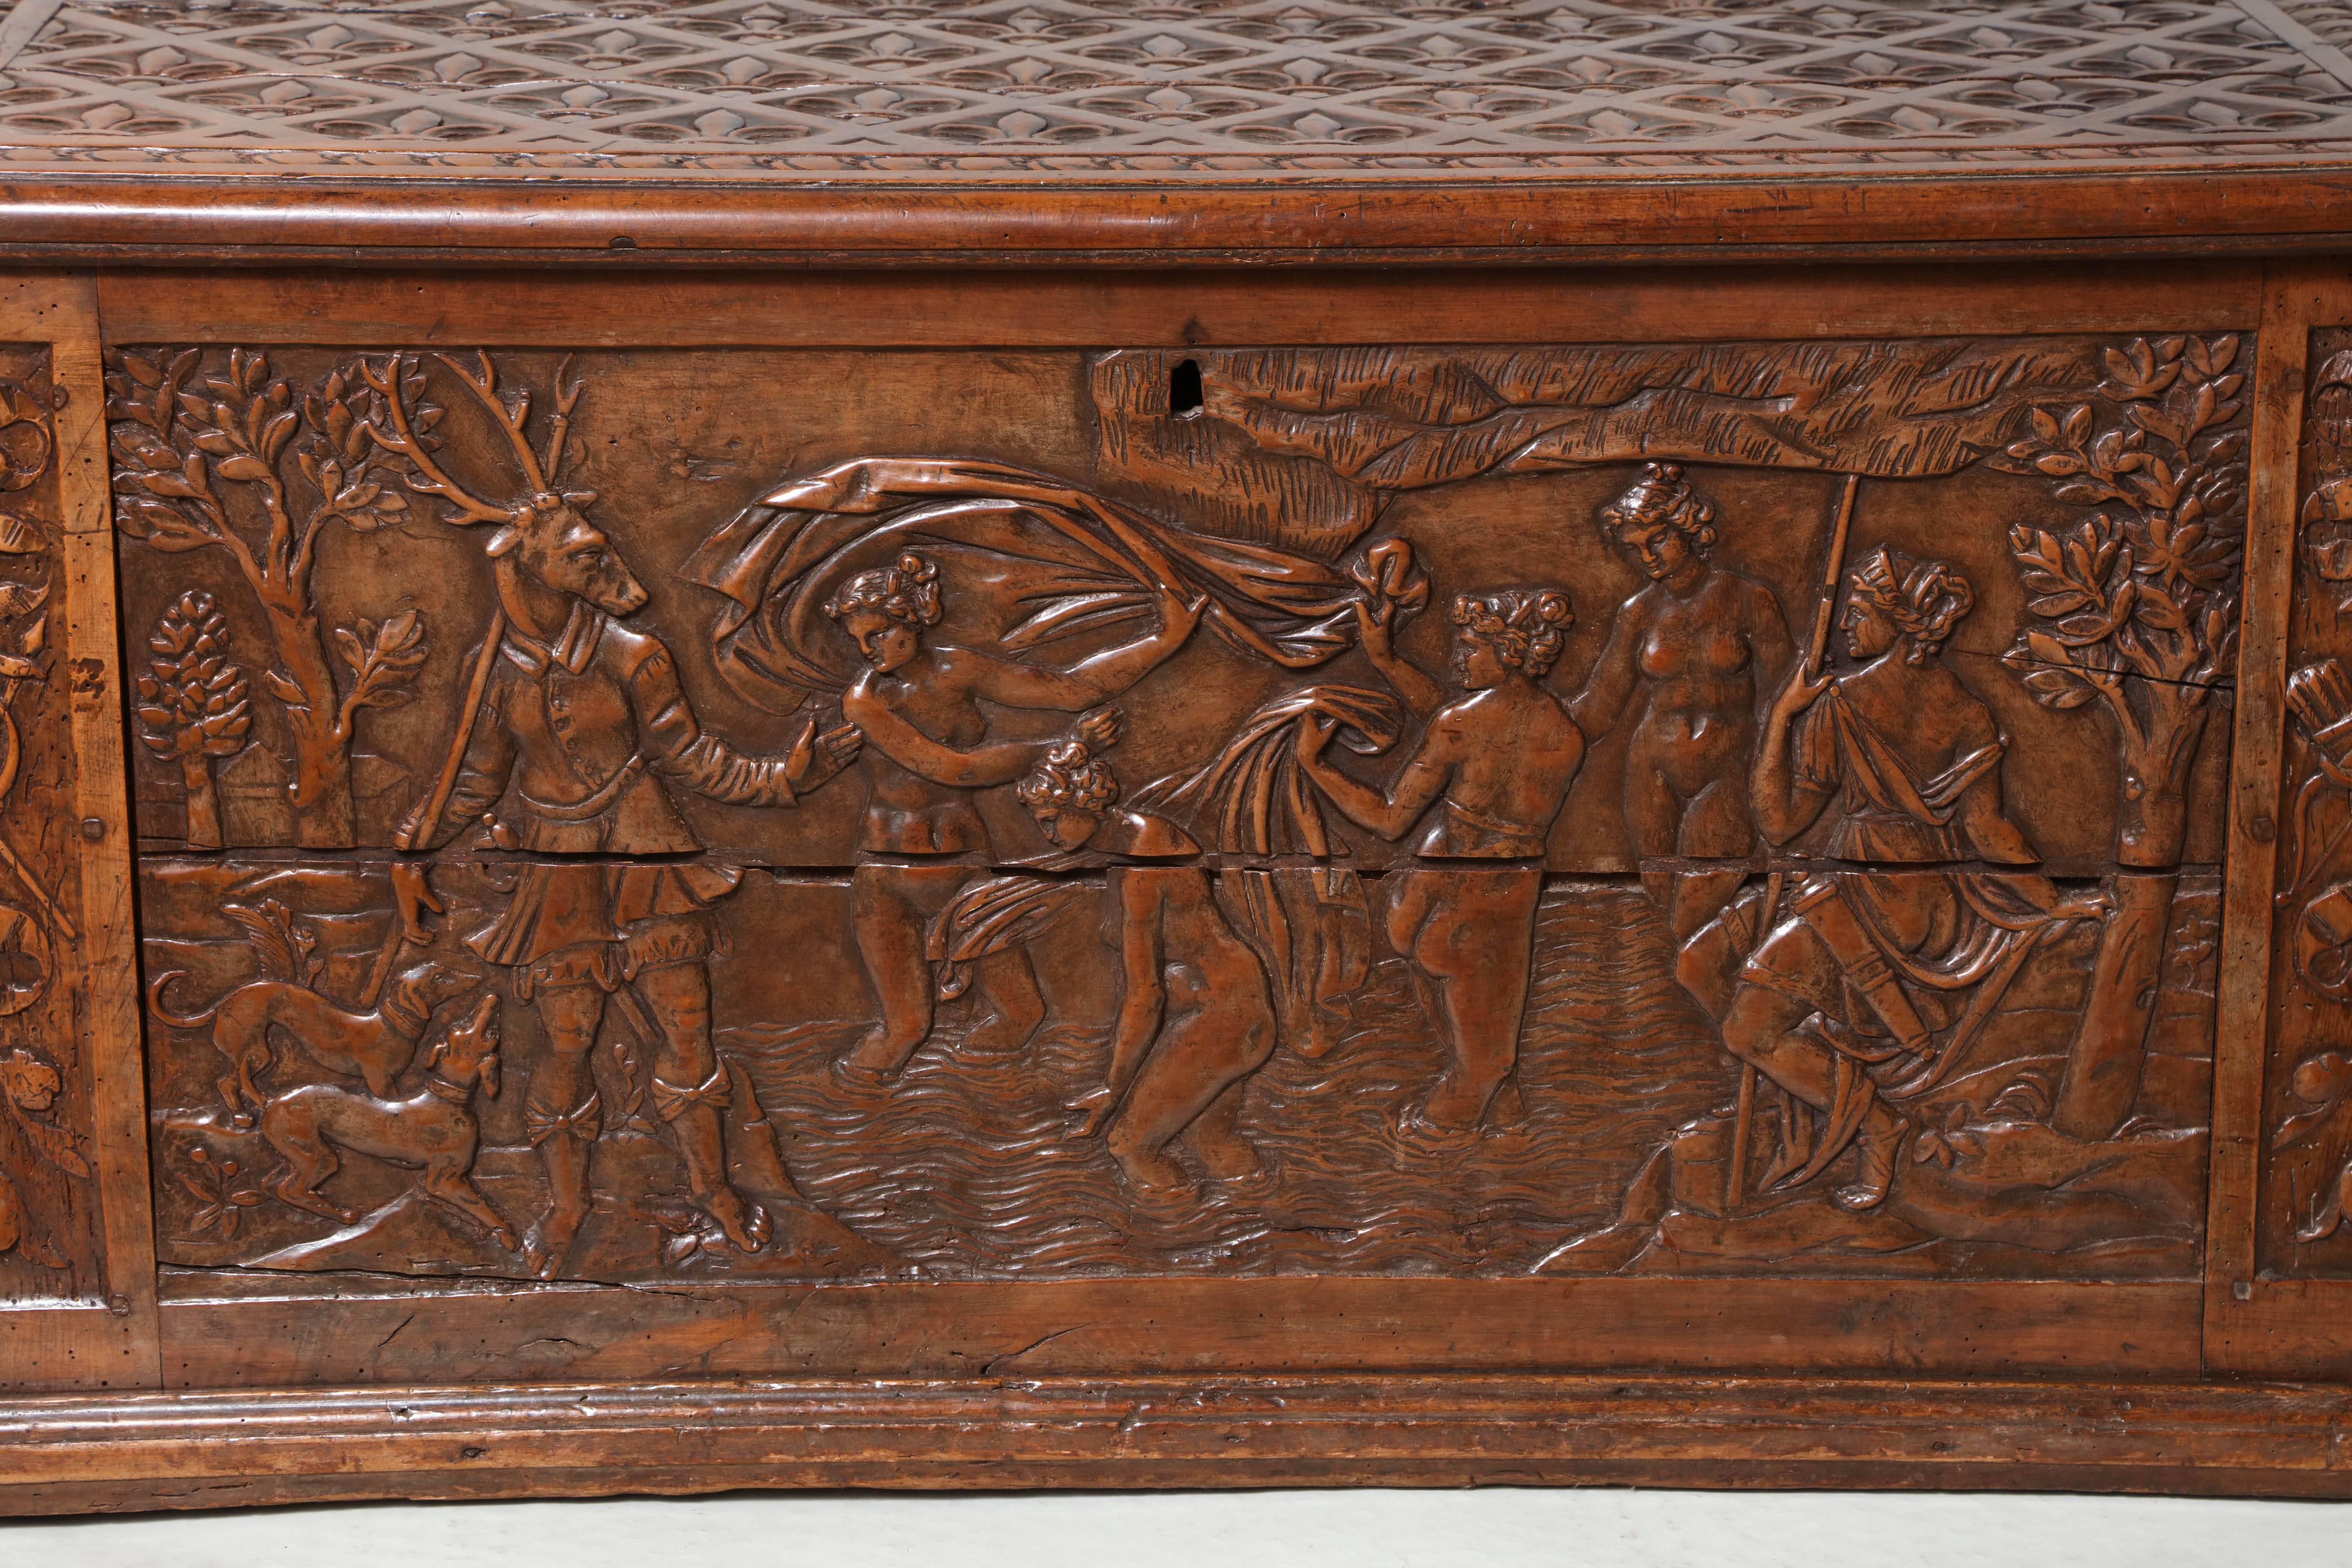 Renaissance 16th Century Pearwood Coffer Depicting Diana and Actaeon